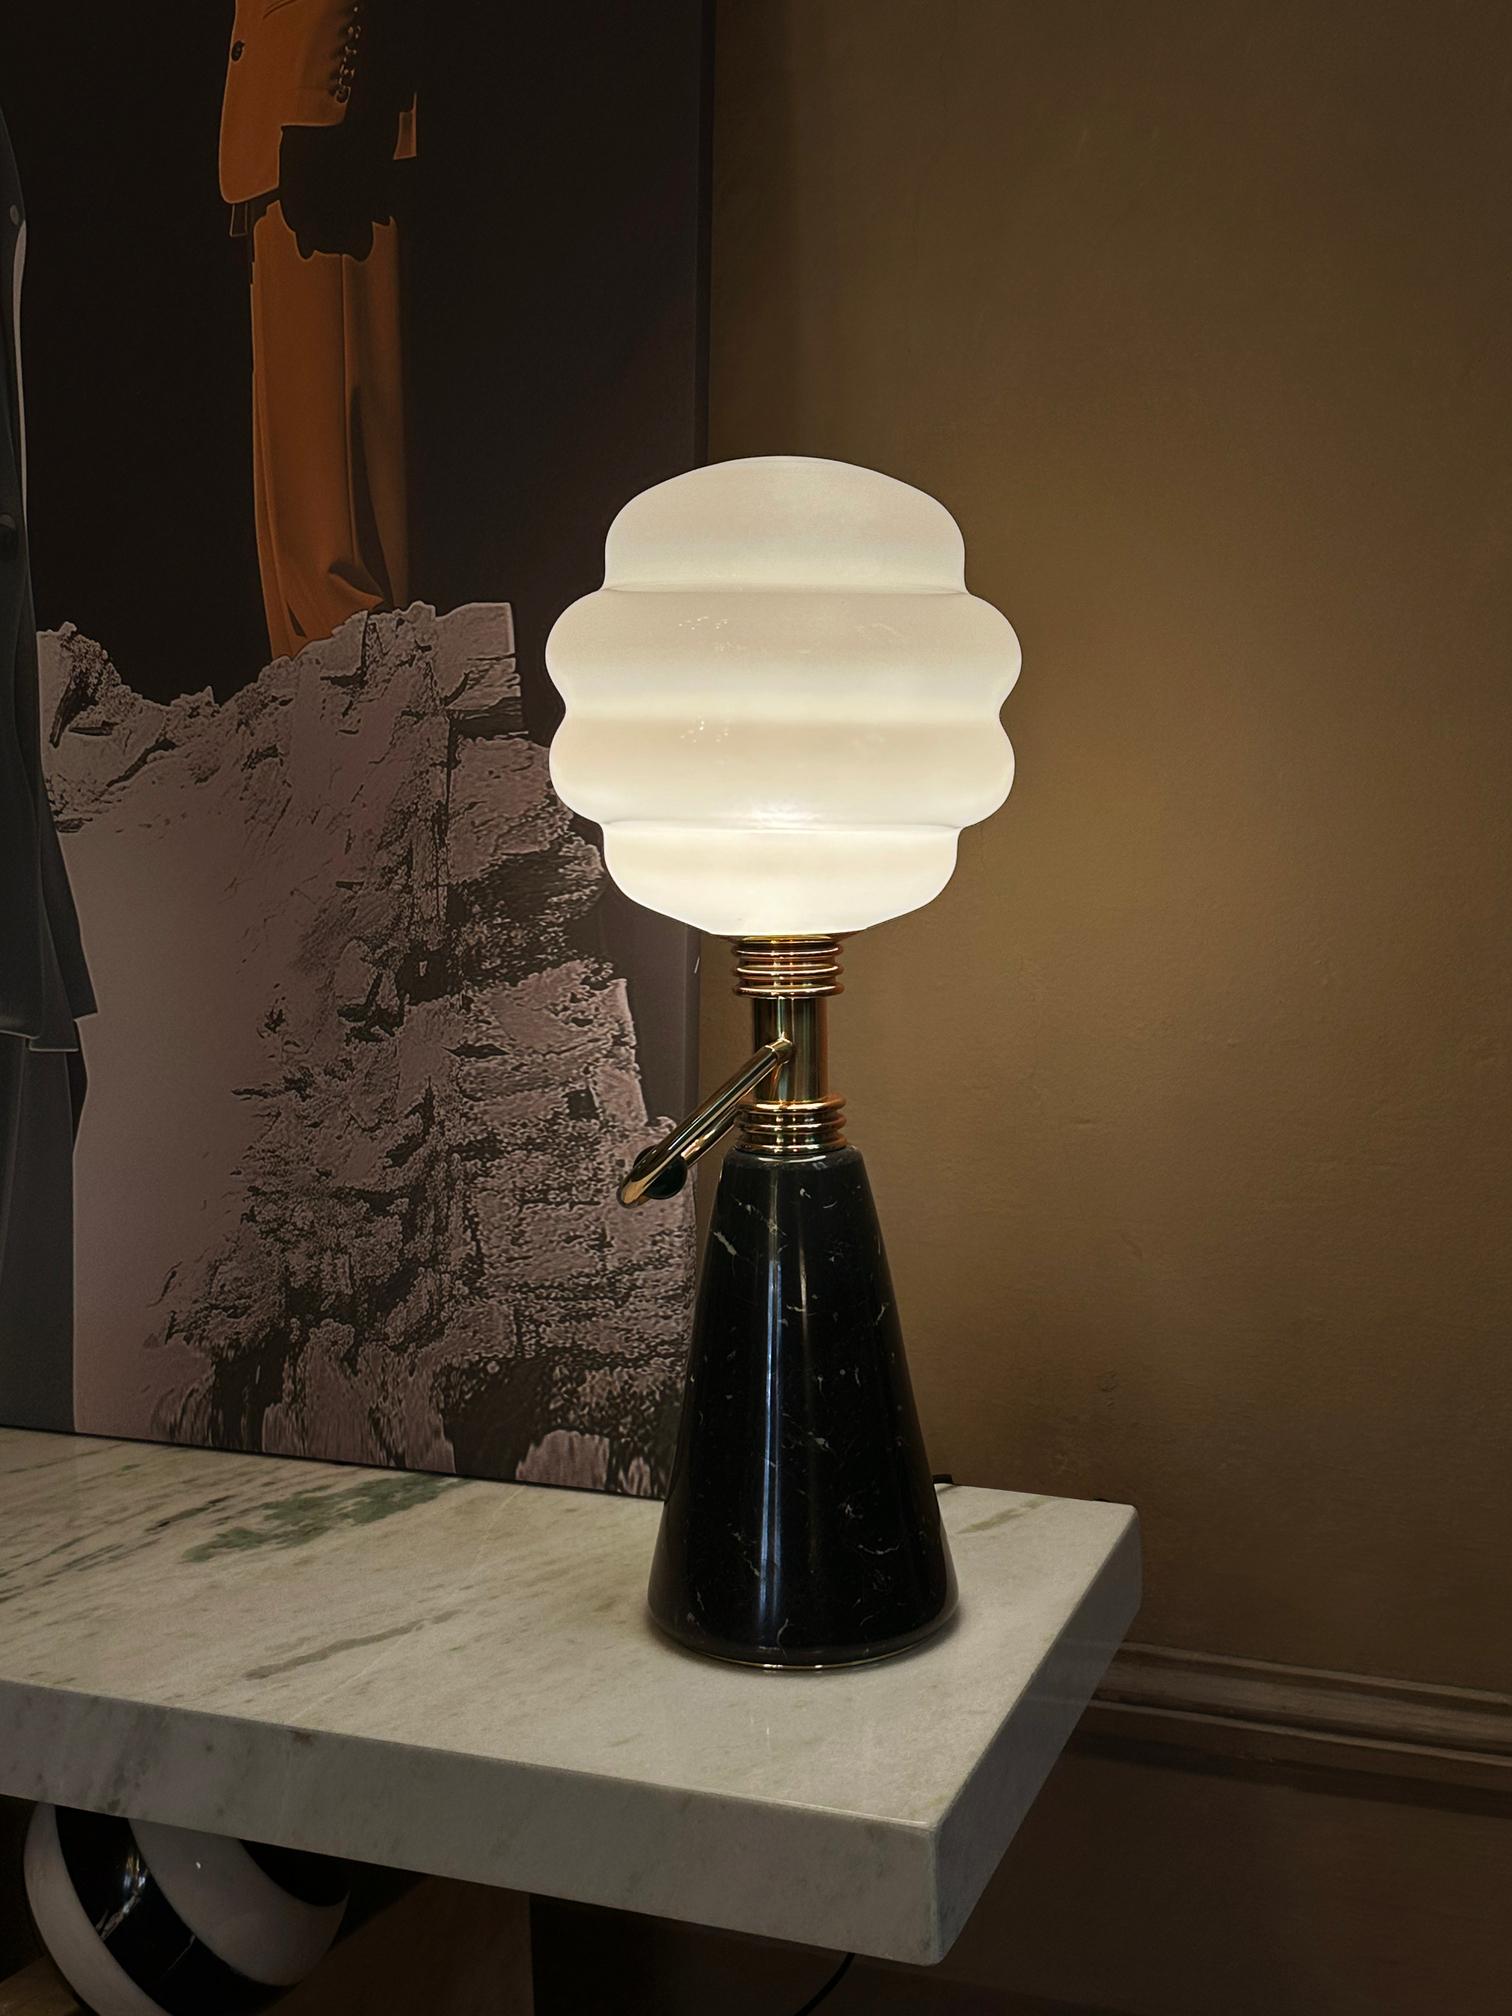 Luminous table lamp revives the timeless shapes from the ’30s, balancing bold and elegant forms. A design table lamp is a classic reinterpretation turned into a modern, outrageous table lamp.

Materials: Width: 24 cm  9.4 in – Depth: 24 cm  9.4 in –